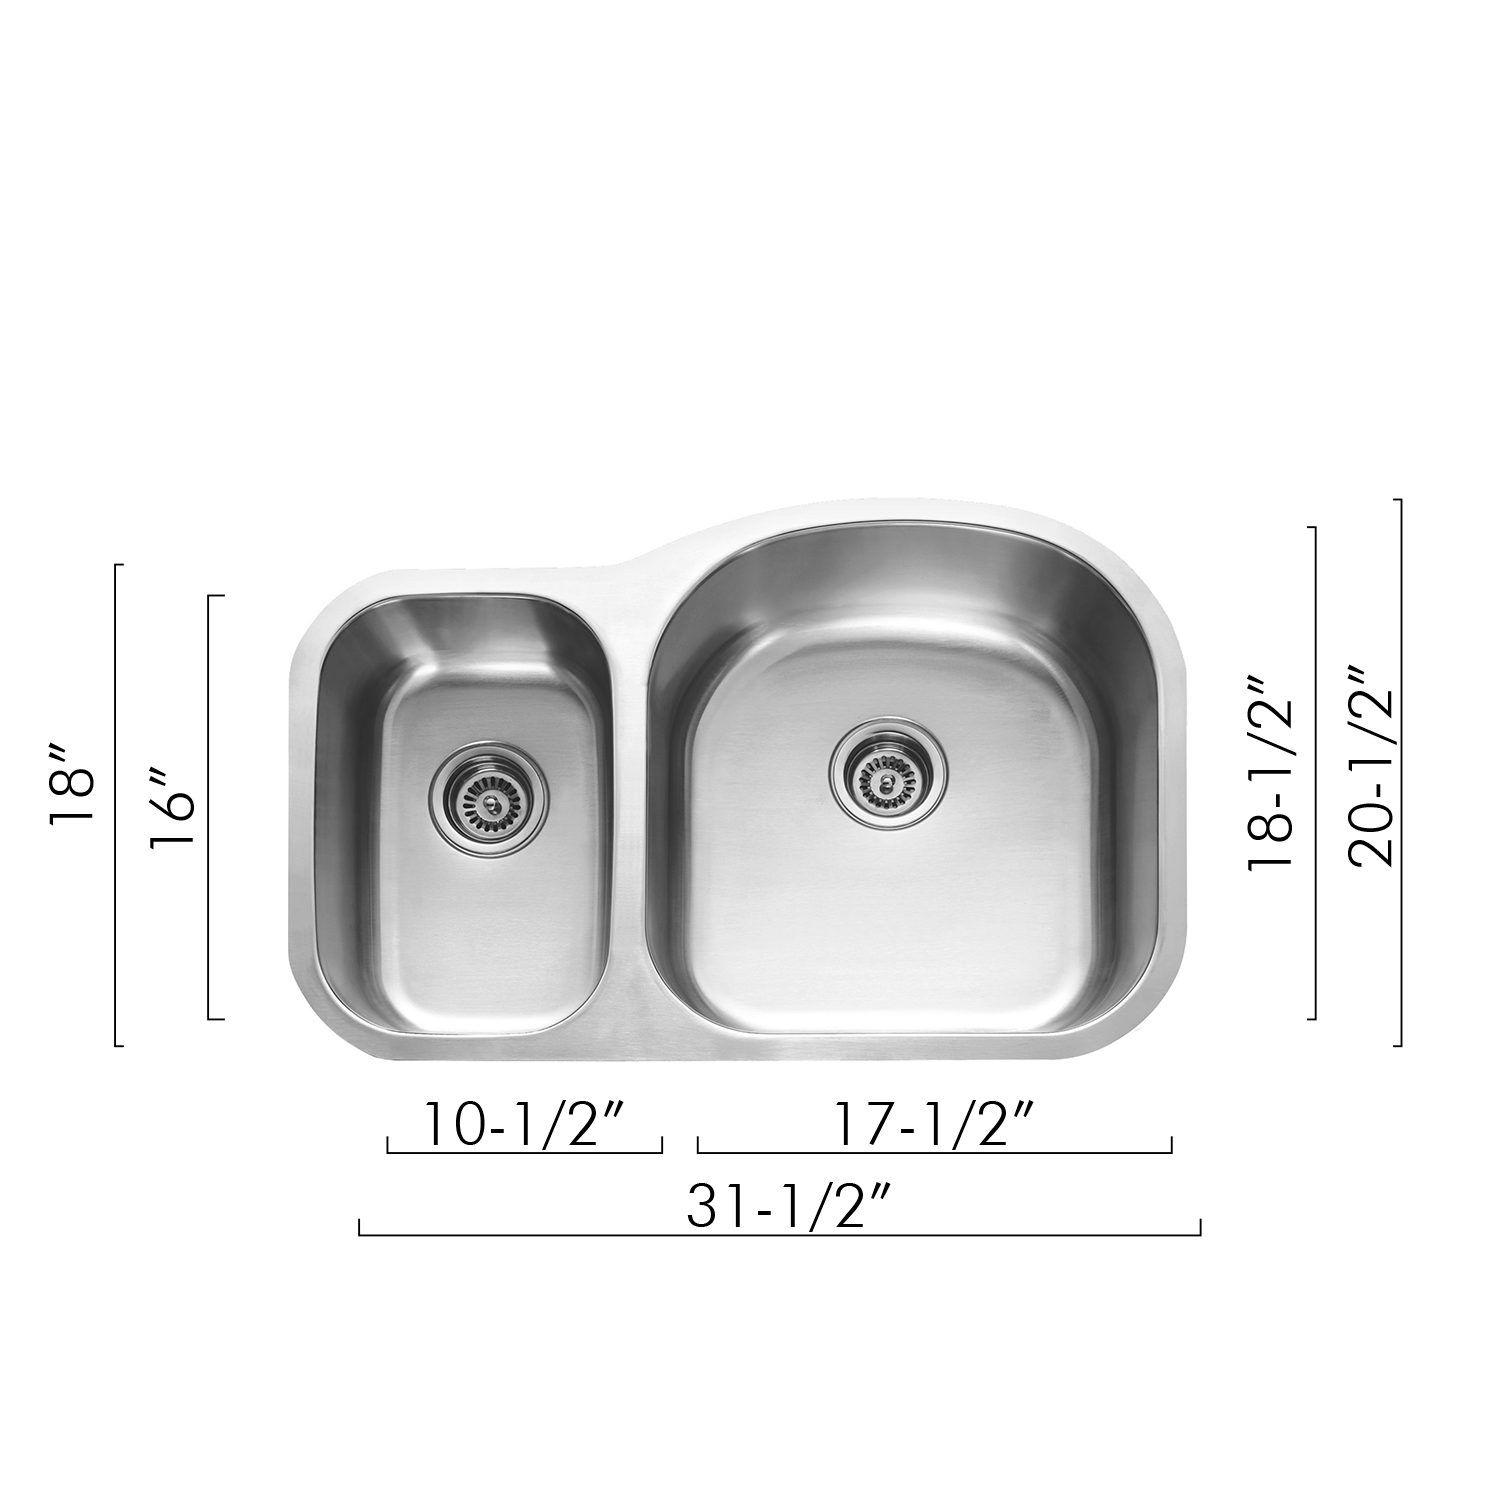 DAX Farmhouse Single Bowl Kitchen Sink, 18 Gauge Stainless Steel, Brushed Finish, 30 x 21 x 10 Inches (DAX-3021R10)